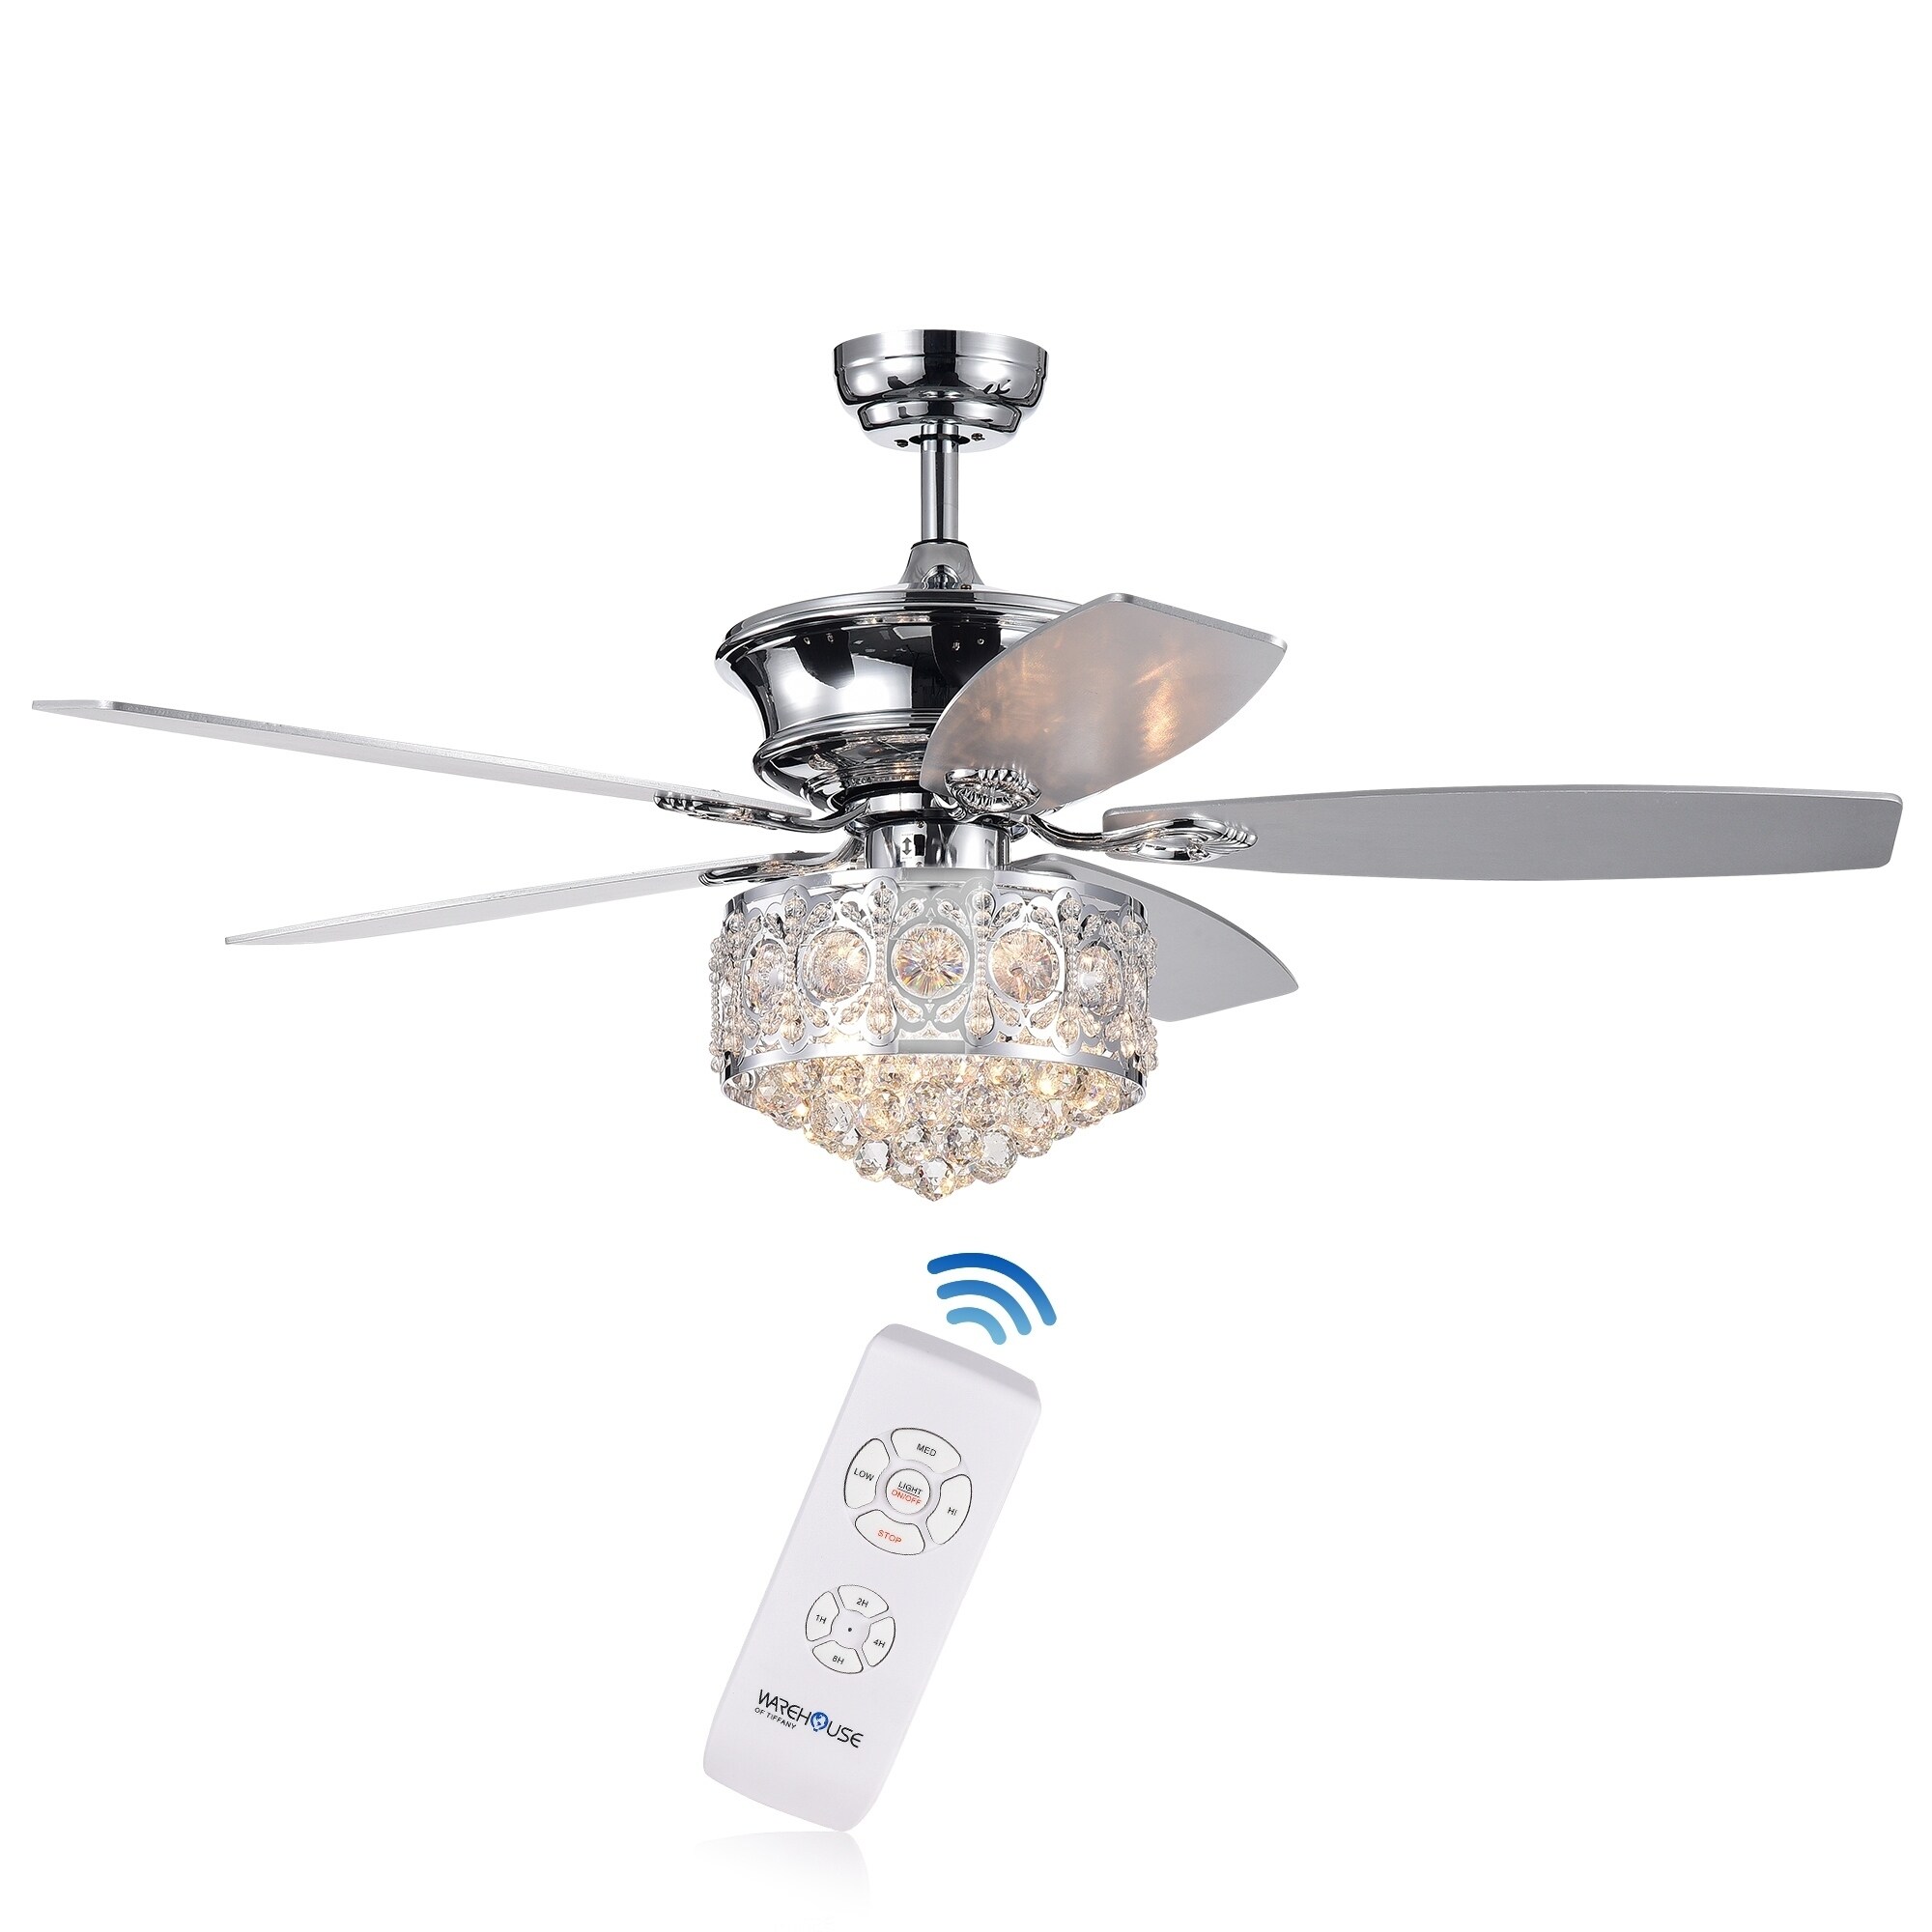 Shop Hasna 52 Inch Chrome Crystal Lighted Ceiling Fan Optional